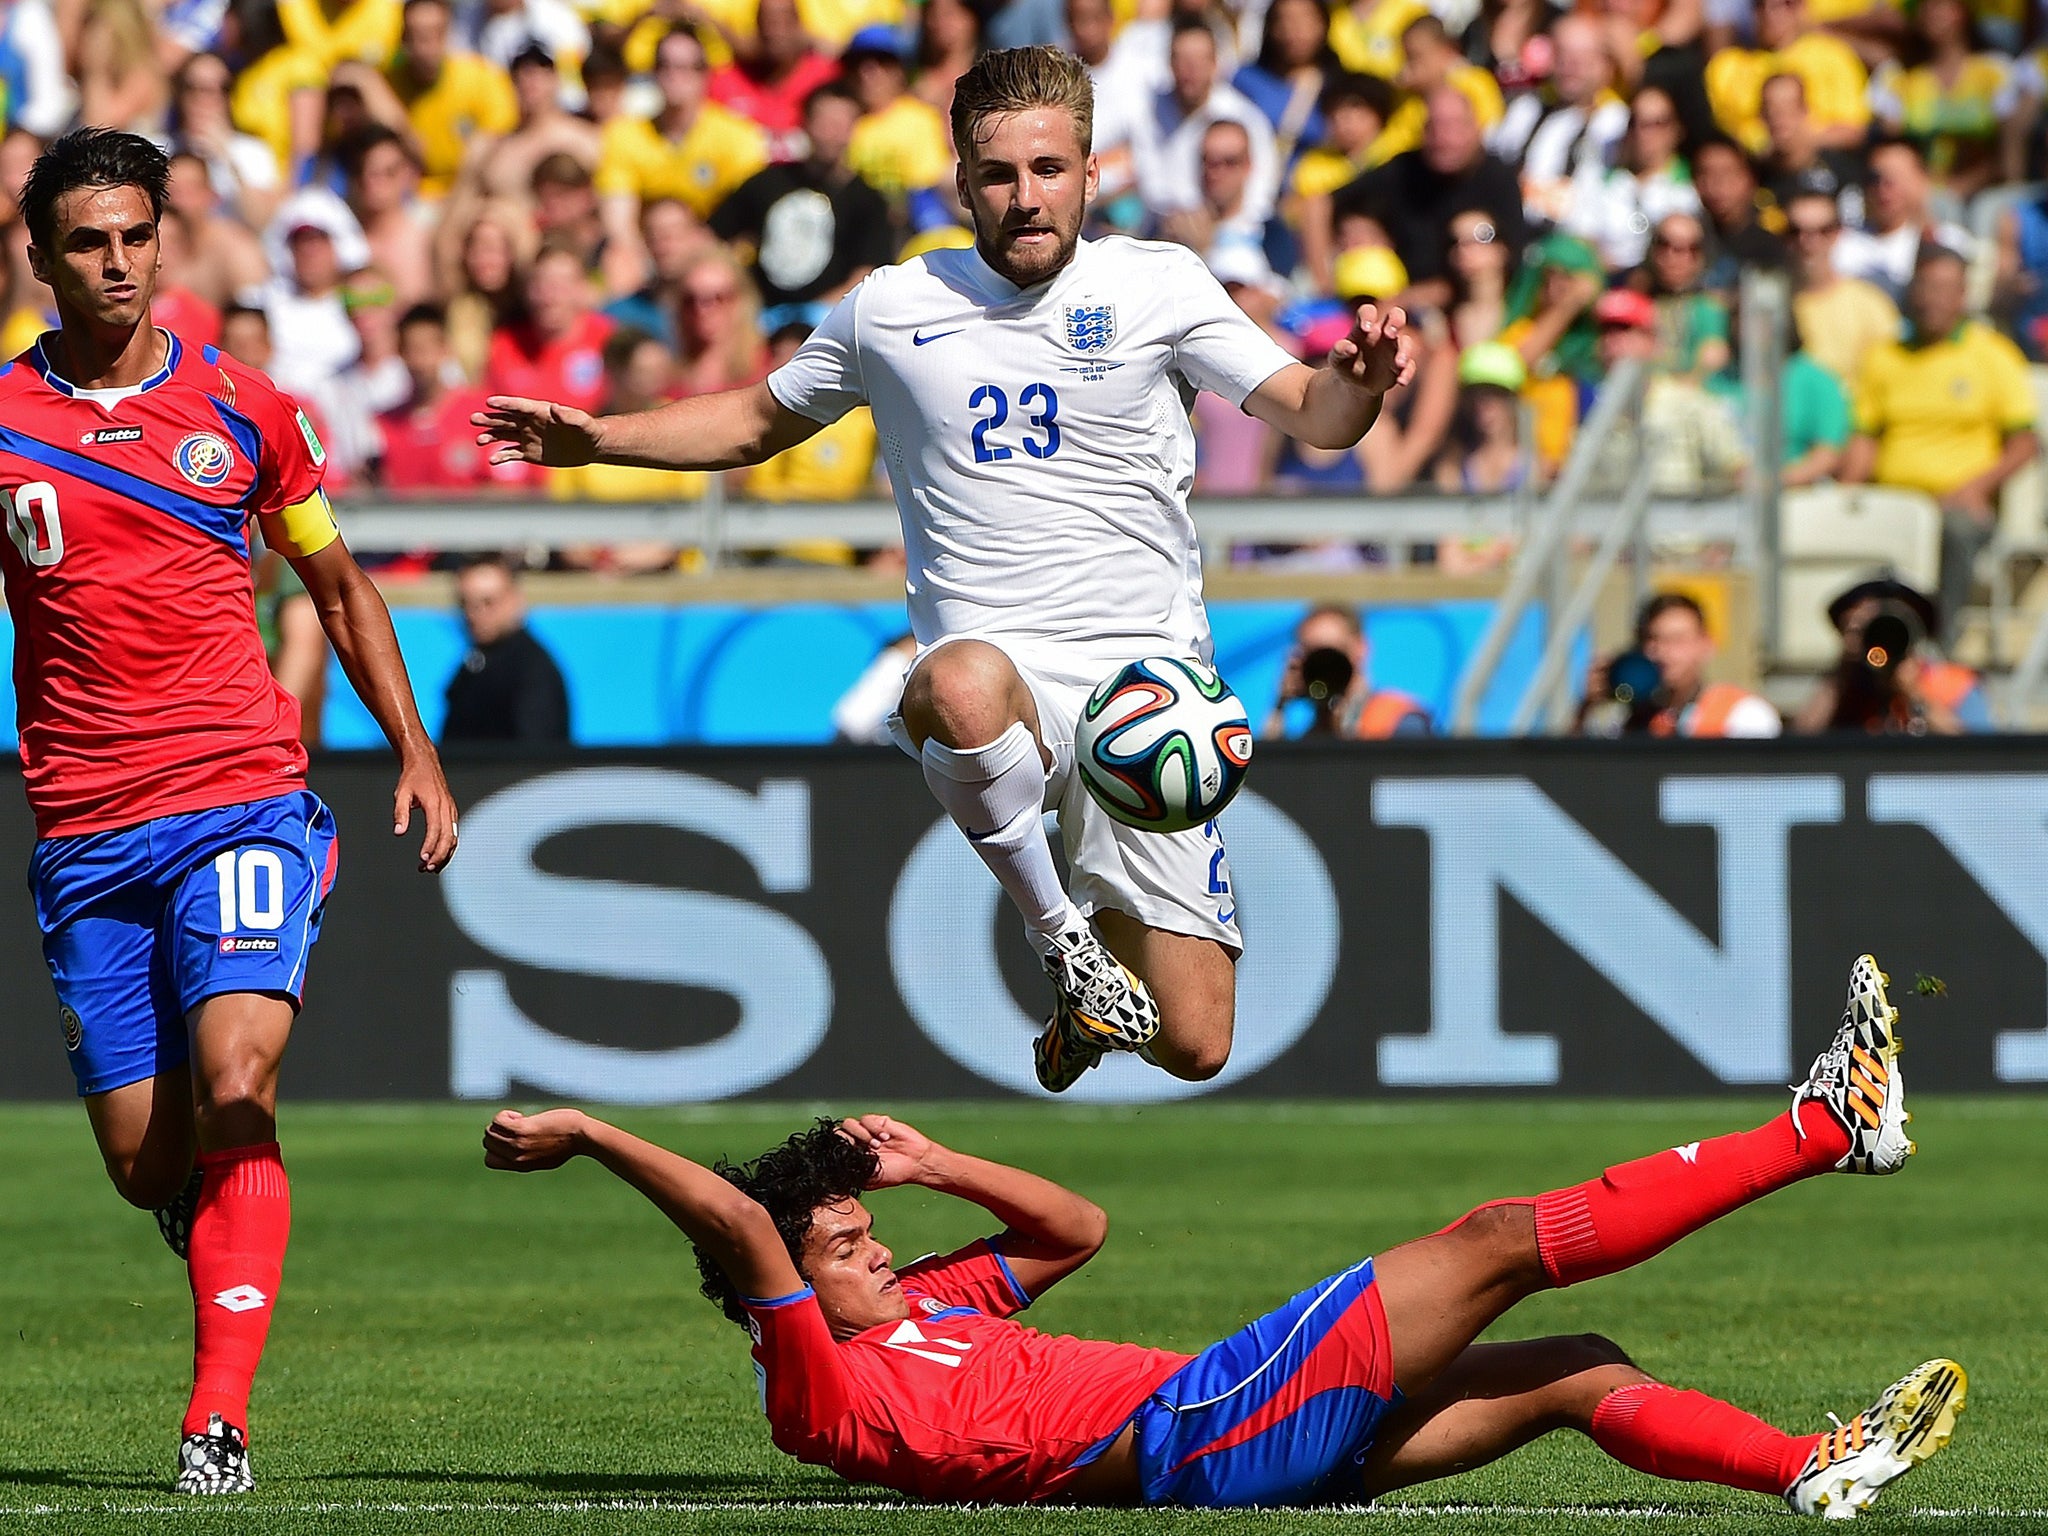 Luke Shaw in action at the World Cup